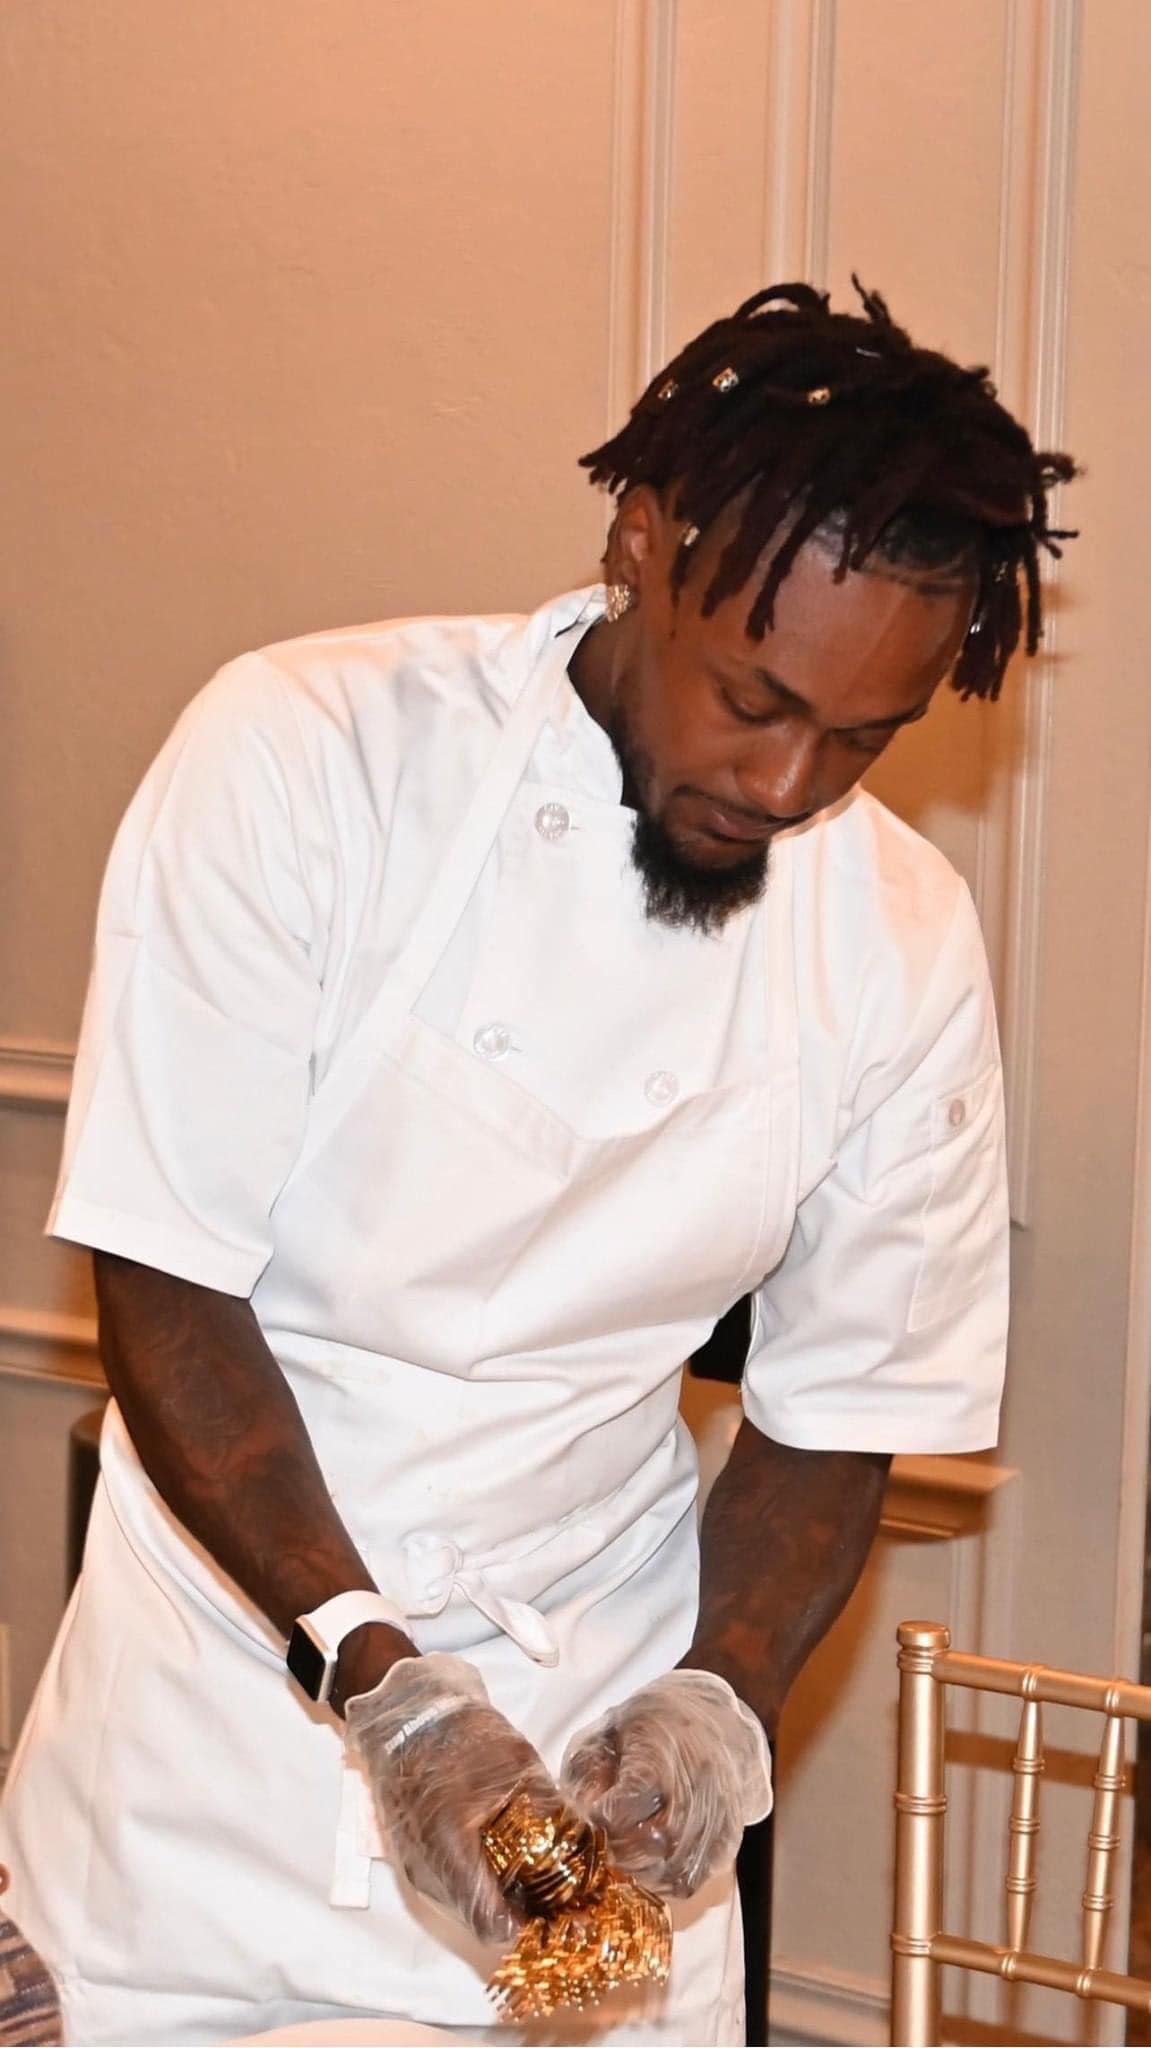 Chef Dee setting silverware for a catered event